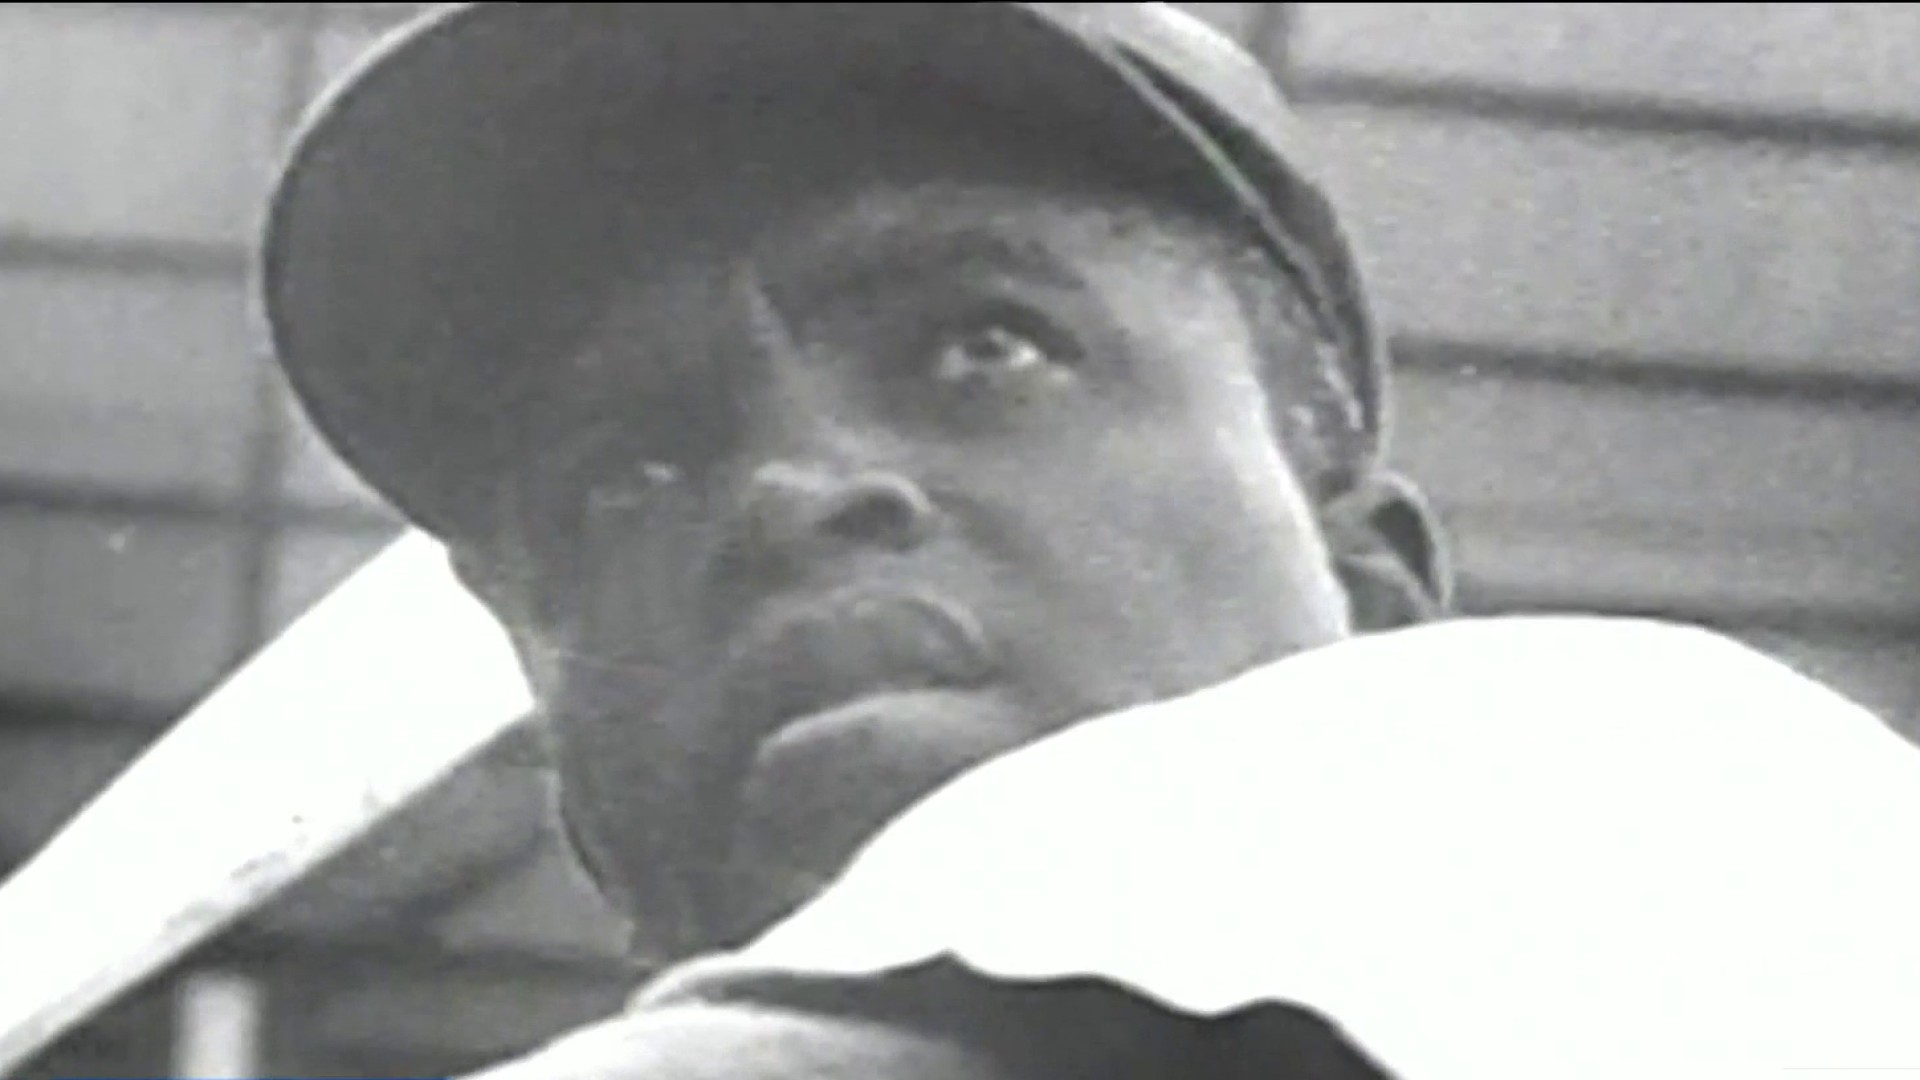 Jackie Robinson's historic baseball contracts that broke the color barrier  up for sale